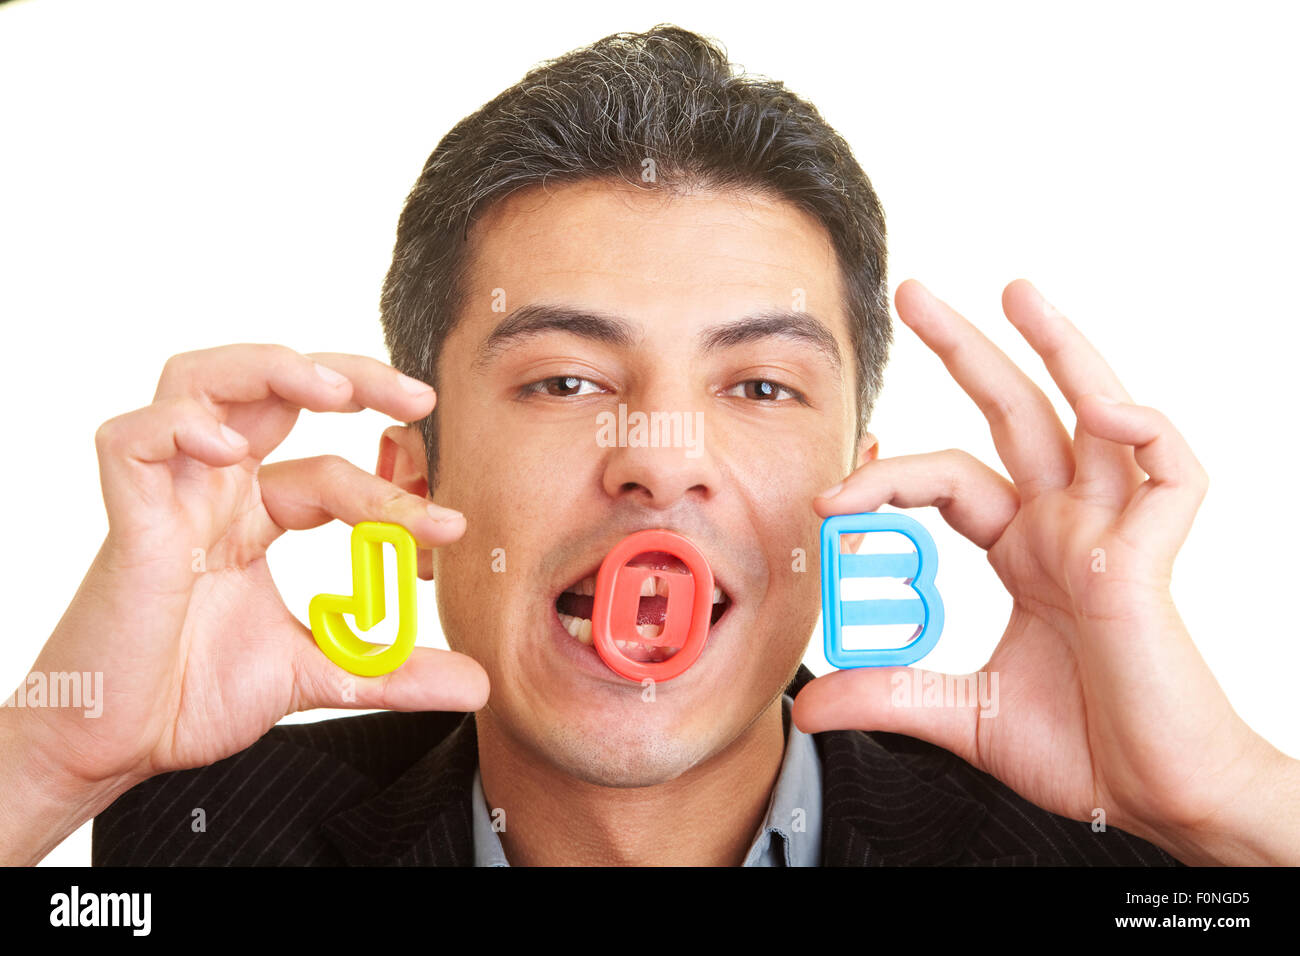 Businessman holding the letters J, O, B in his hands Stock Photo